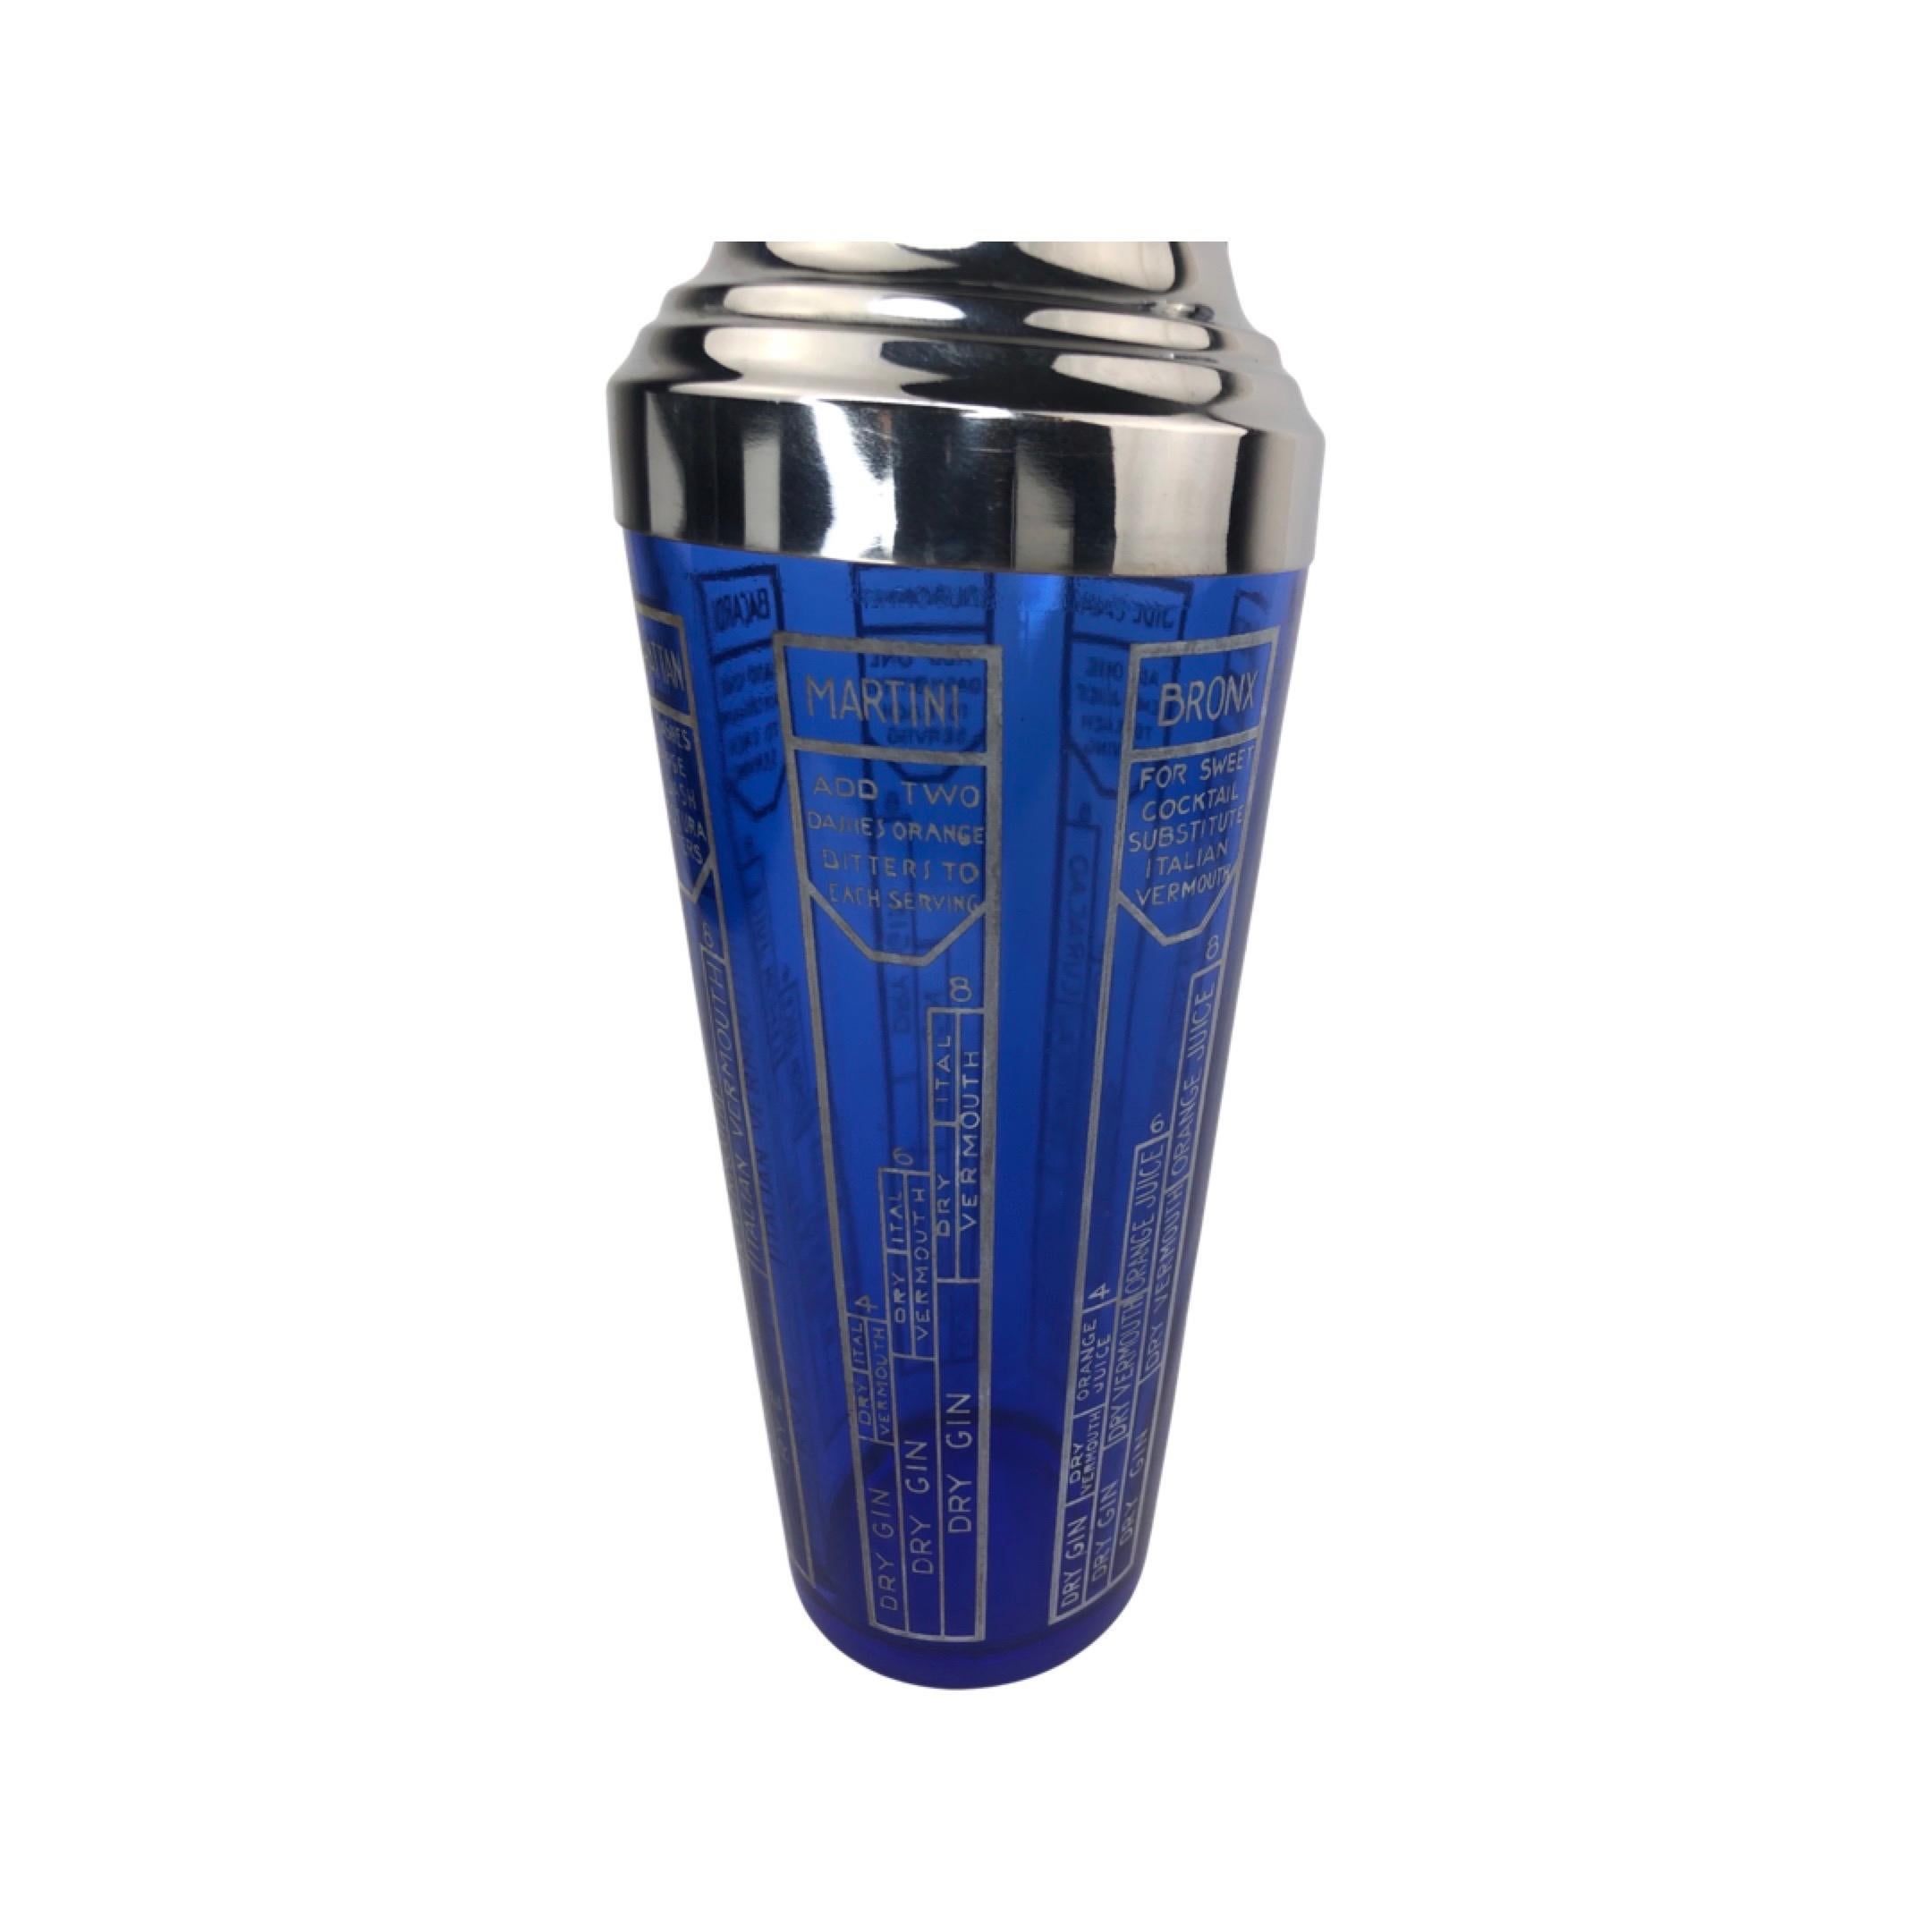 Art Deco Cobalt Blue Cocktail Shaker with Classic Recipes for Bronx, Martini, Alexander, Sidecar, Dubonnet, Bacardi, and Manhattan in white enamel.
